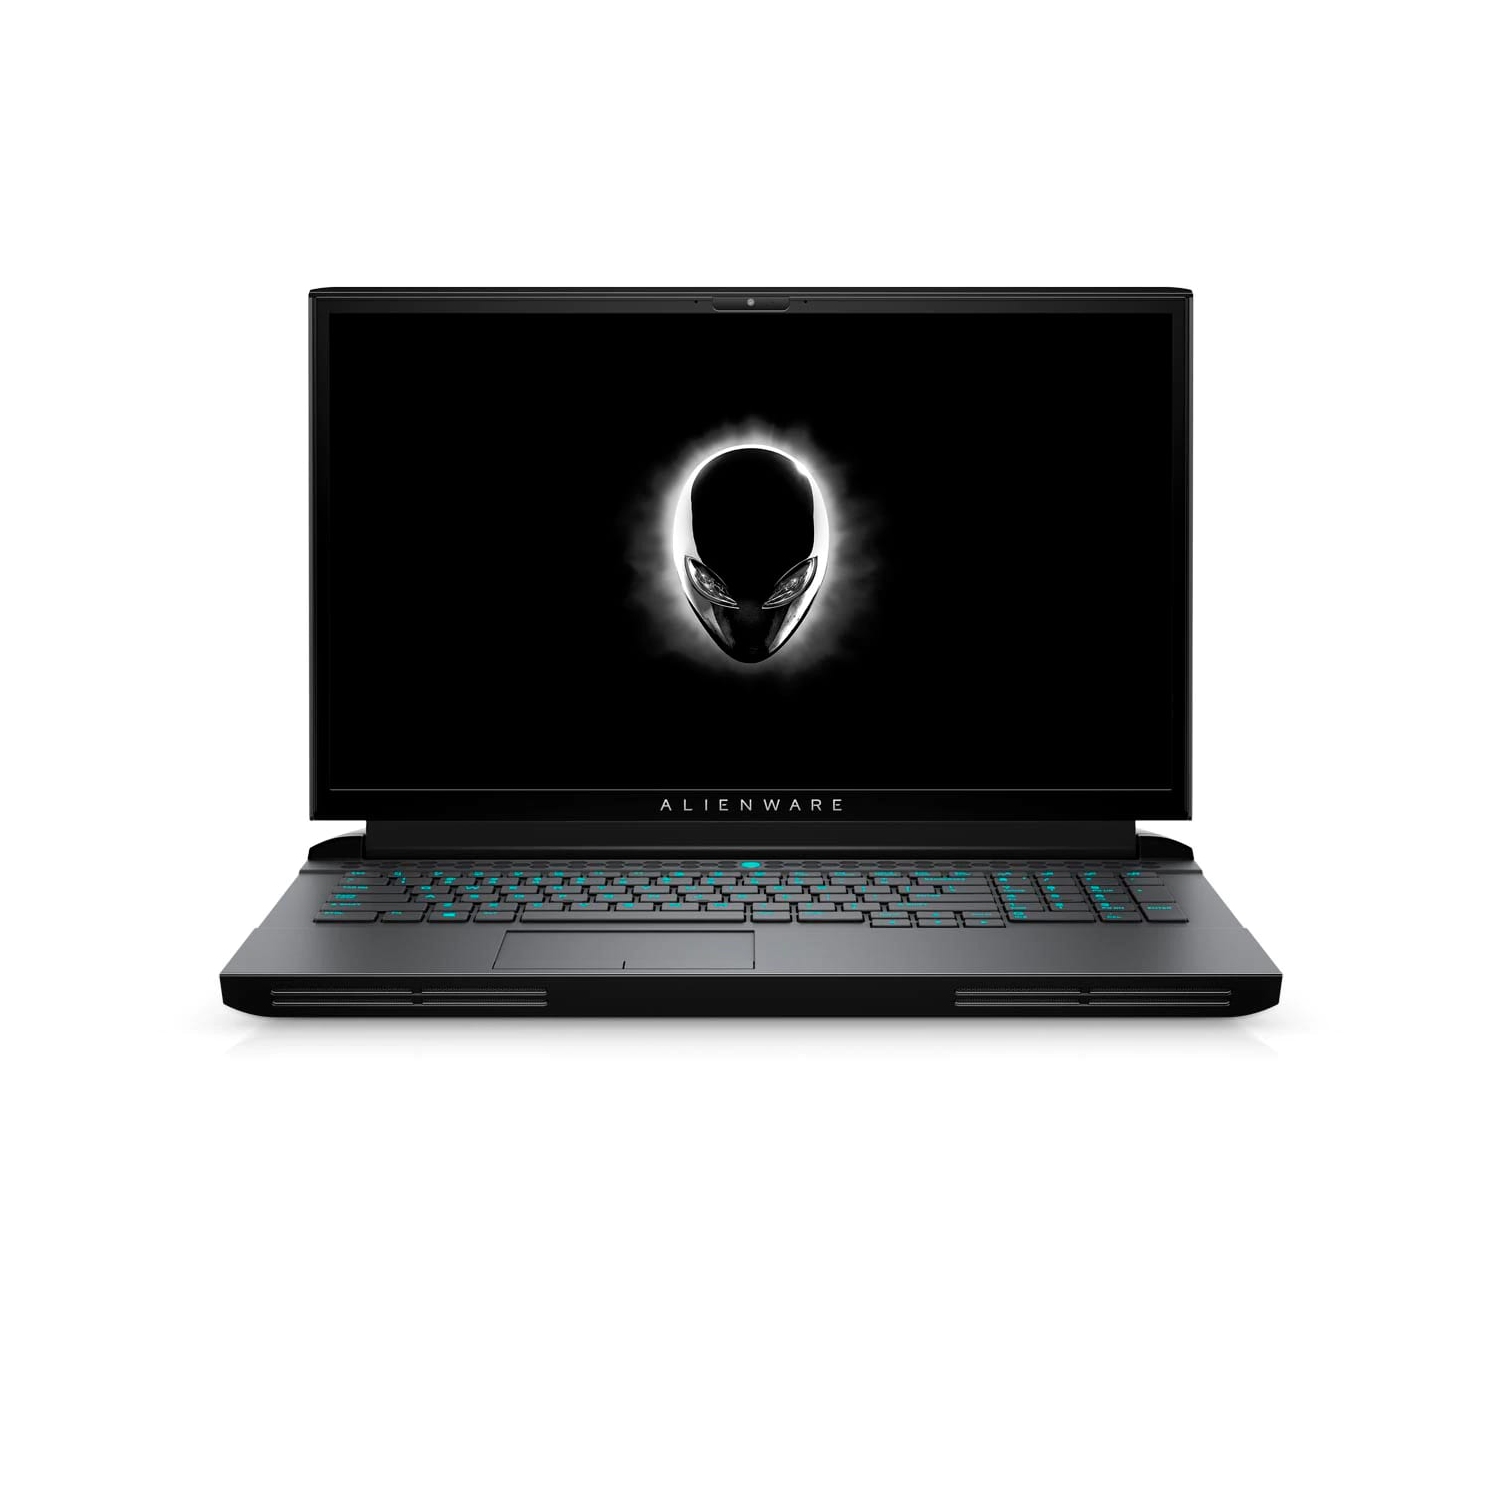 Refurbished (Excellent) - Dell Alienware 17 51m R2 Gaming Laptop (2020), 17.3" FHD, Core i7, 256GB SSD, 32GB RAM, RTX 2060, 8 Cores @ 4.8 GHz, 10th Gen CPU Certified